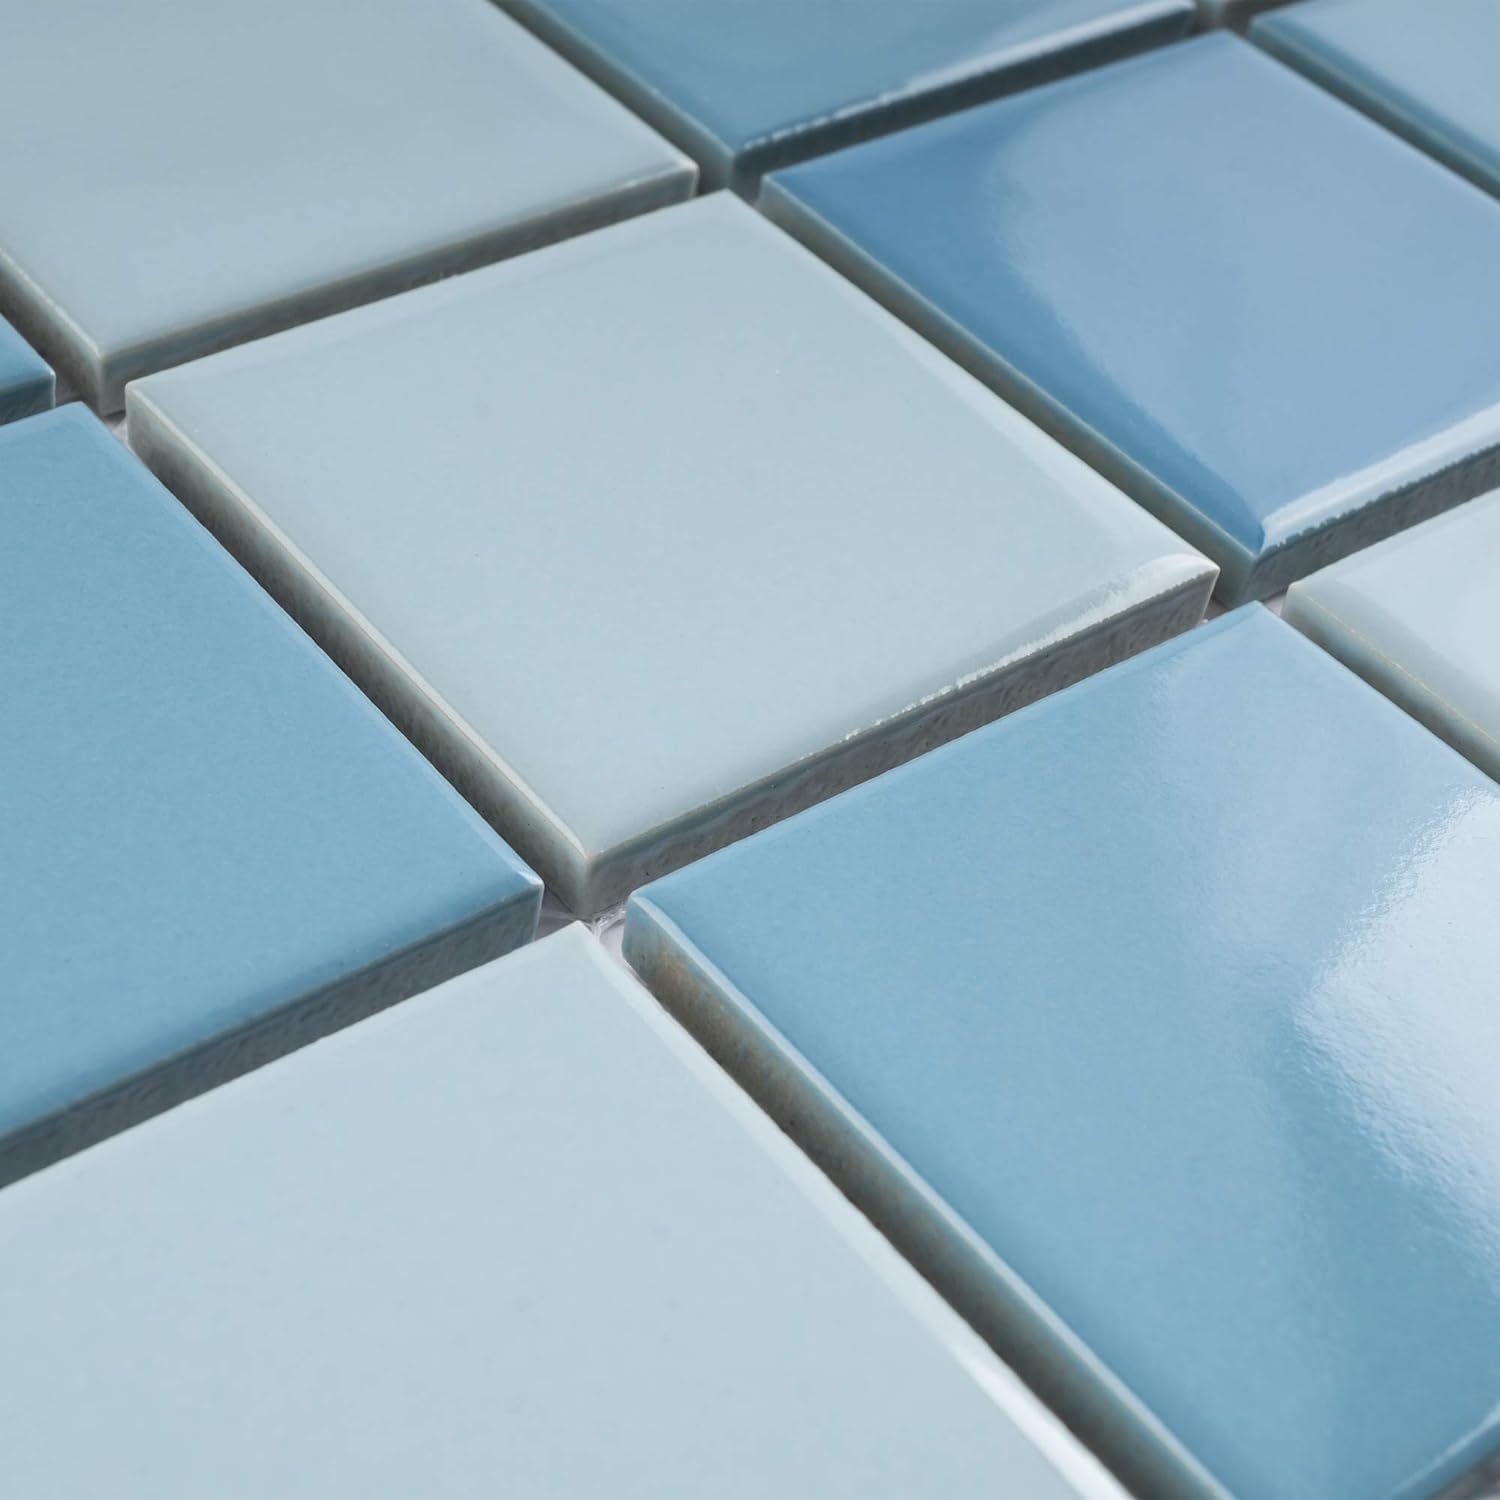 BT-PM21 2" x 2" Square Creamy Light Blue Porcelain (Polish Finish) Floor & Wall Tile & Pool Tile Mosaic Tile 11-3/4 in. x 11-3/4 in. x 6mm (Thickness)